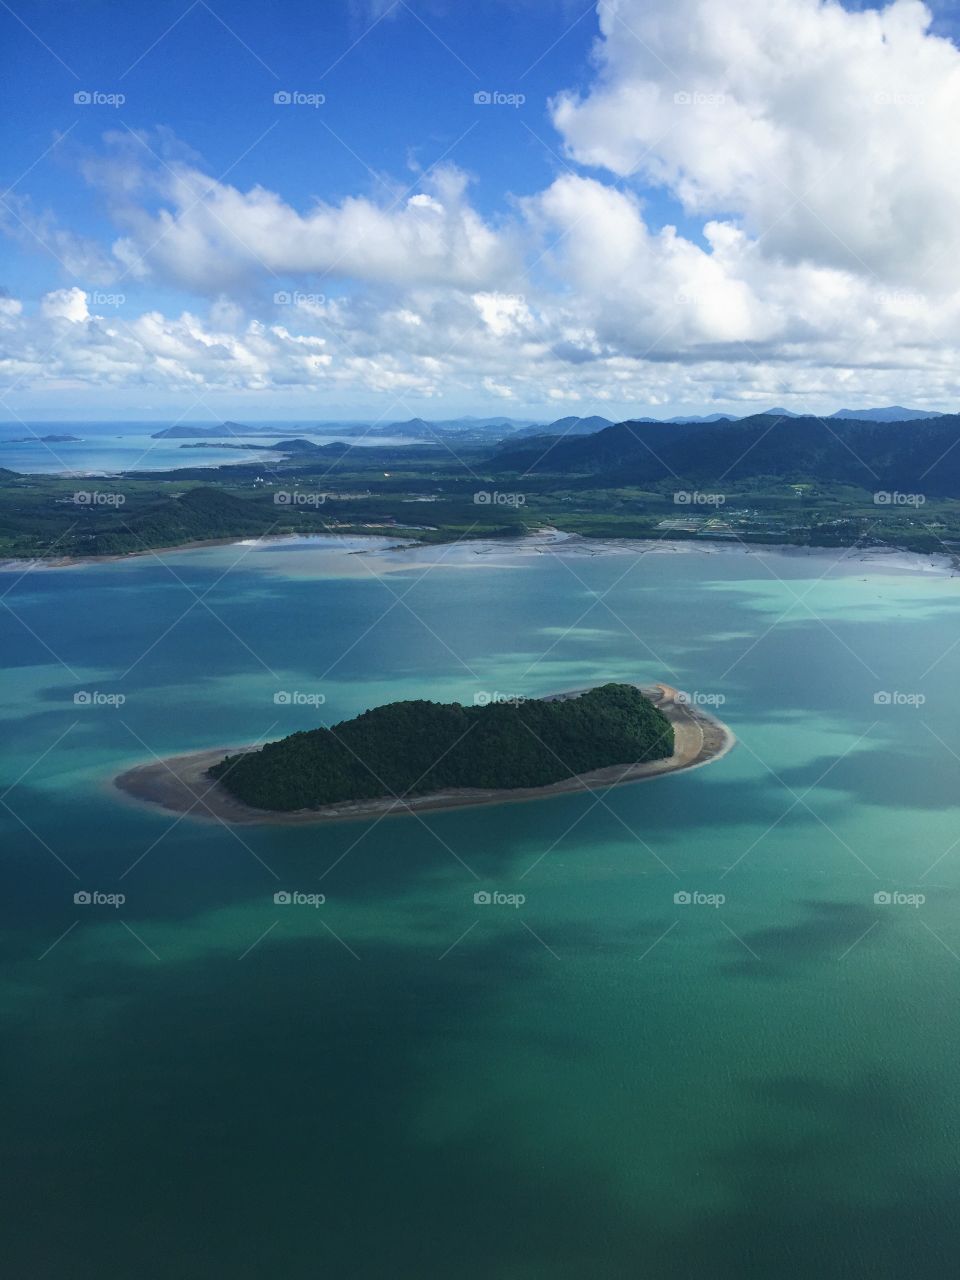 Window view of some of the islands prior to landing in Phuket international airport 